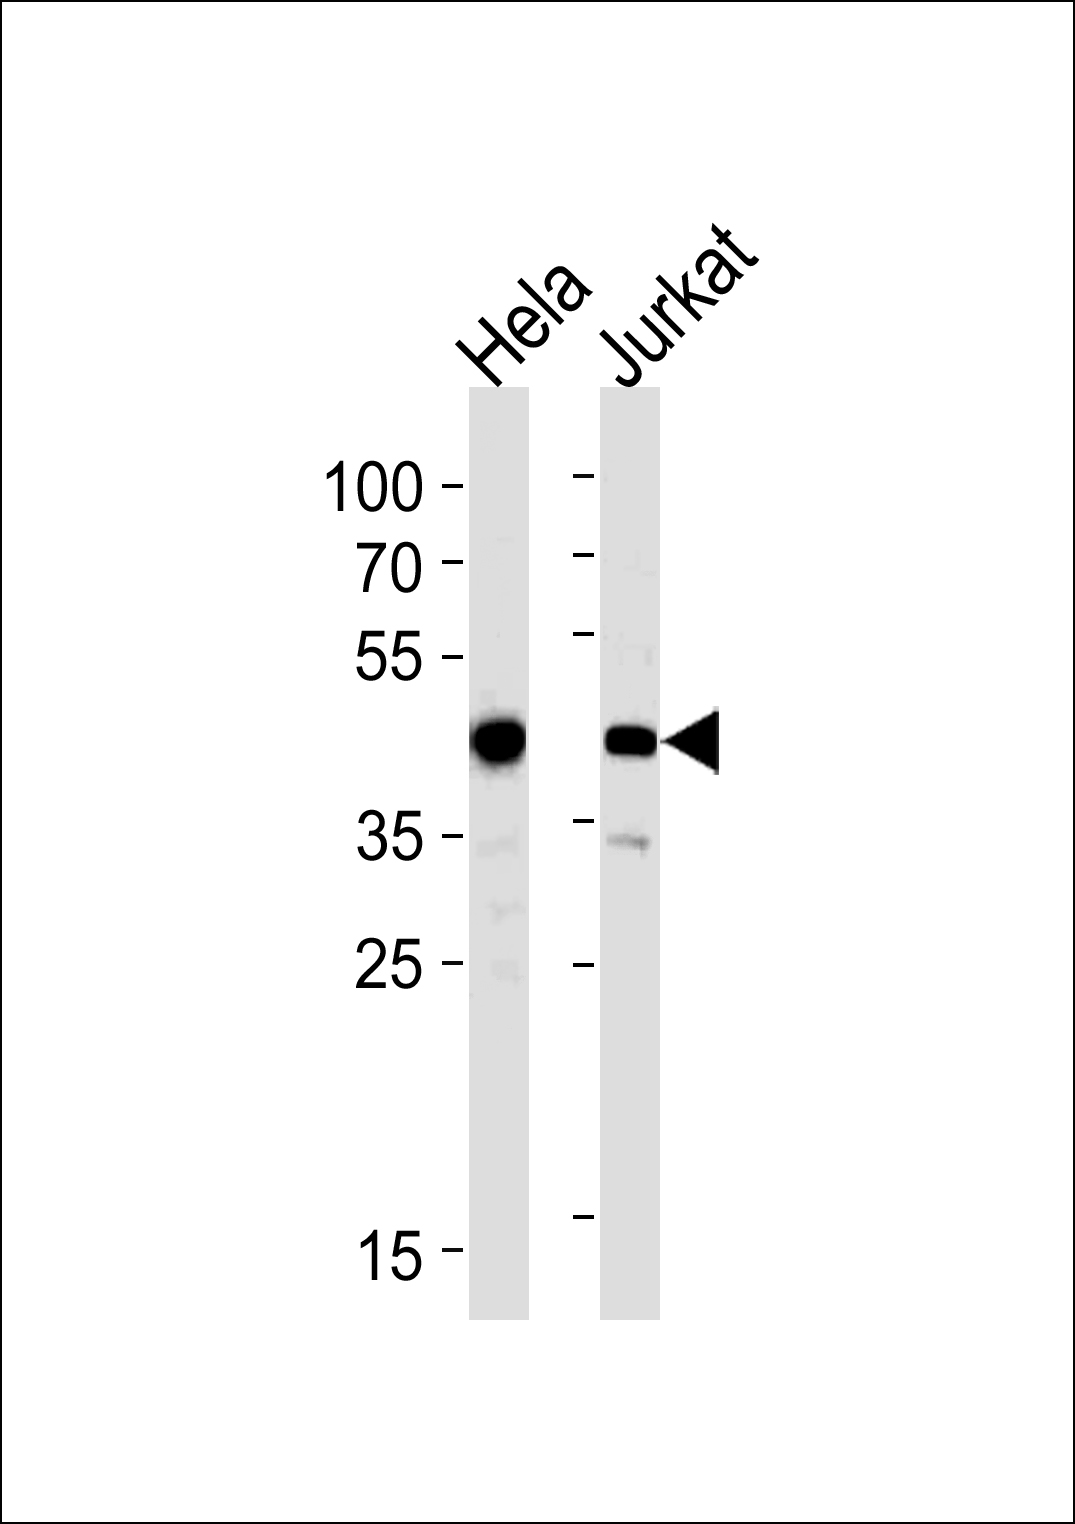 ACTR2 Antibody (Center) (Cat.# AP6533c) western blot analysis in Hela,Jurkat cell line lysates (35ug/lane).This demonstrates the ACTR2 antibody detected the ACTR2 protein (arrow).